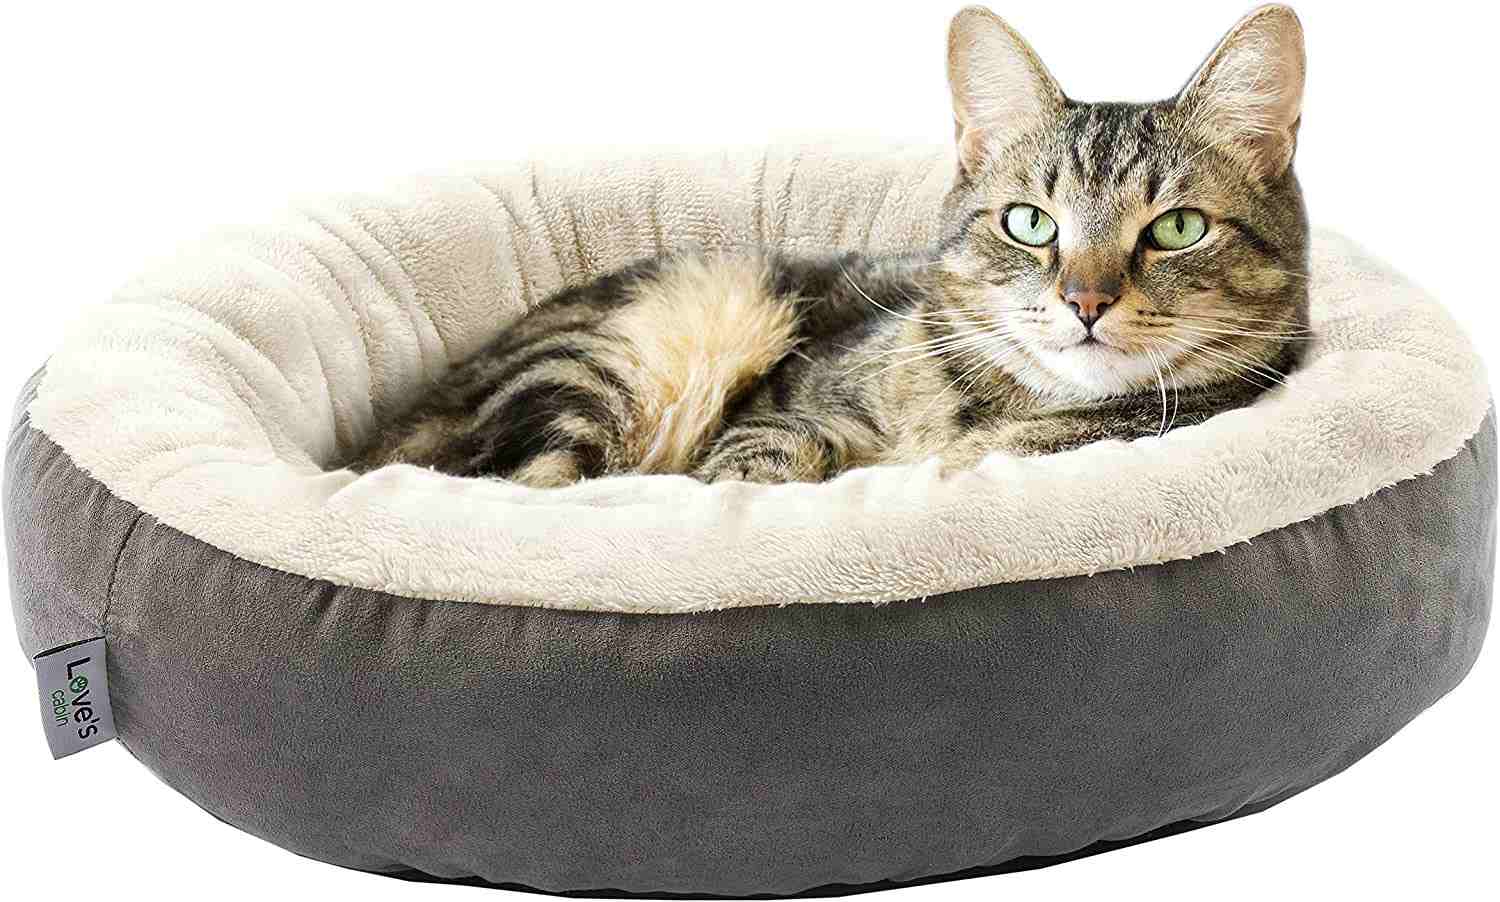 Love's cabin Round Donut Cat and Dog Cushion Bed, 20in Pet Bed for Cats or Small Dogs, Anti-Slip & Water-Resistant Bottom, Super Soft Durable Fabric Pet beds, Washable Luxury Cat & Dog Bed Gray